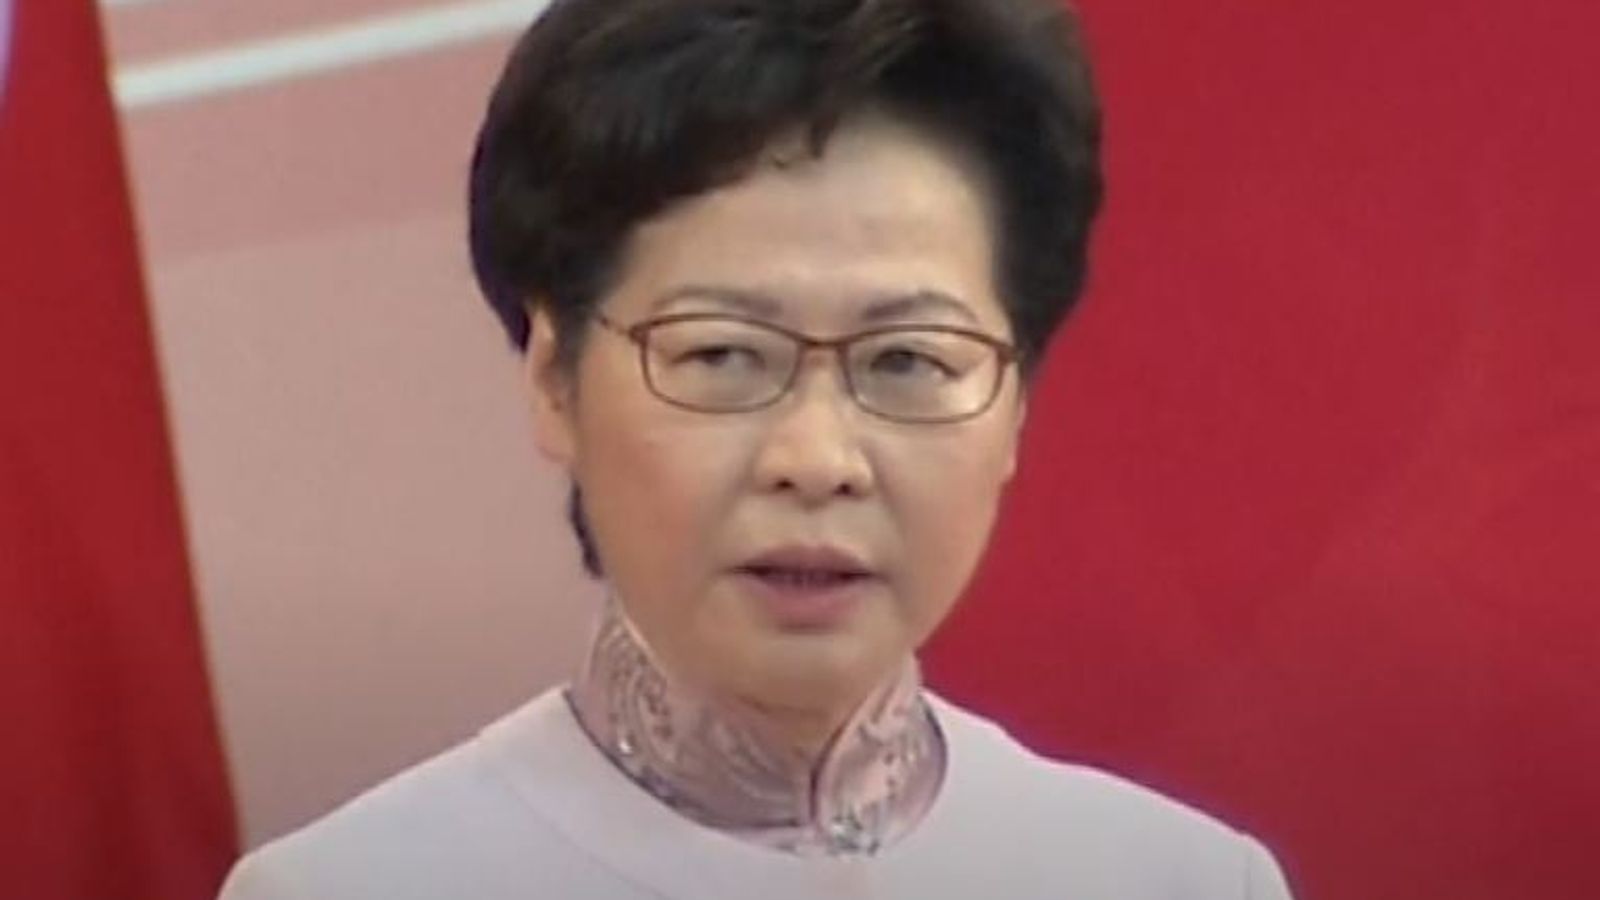 Carrie lam defends enactment of 'reasonable' National Security Law